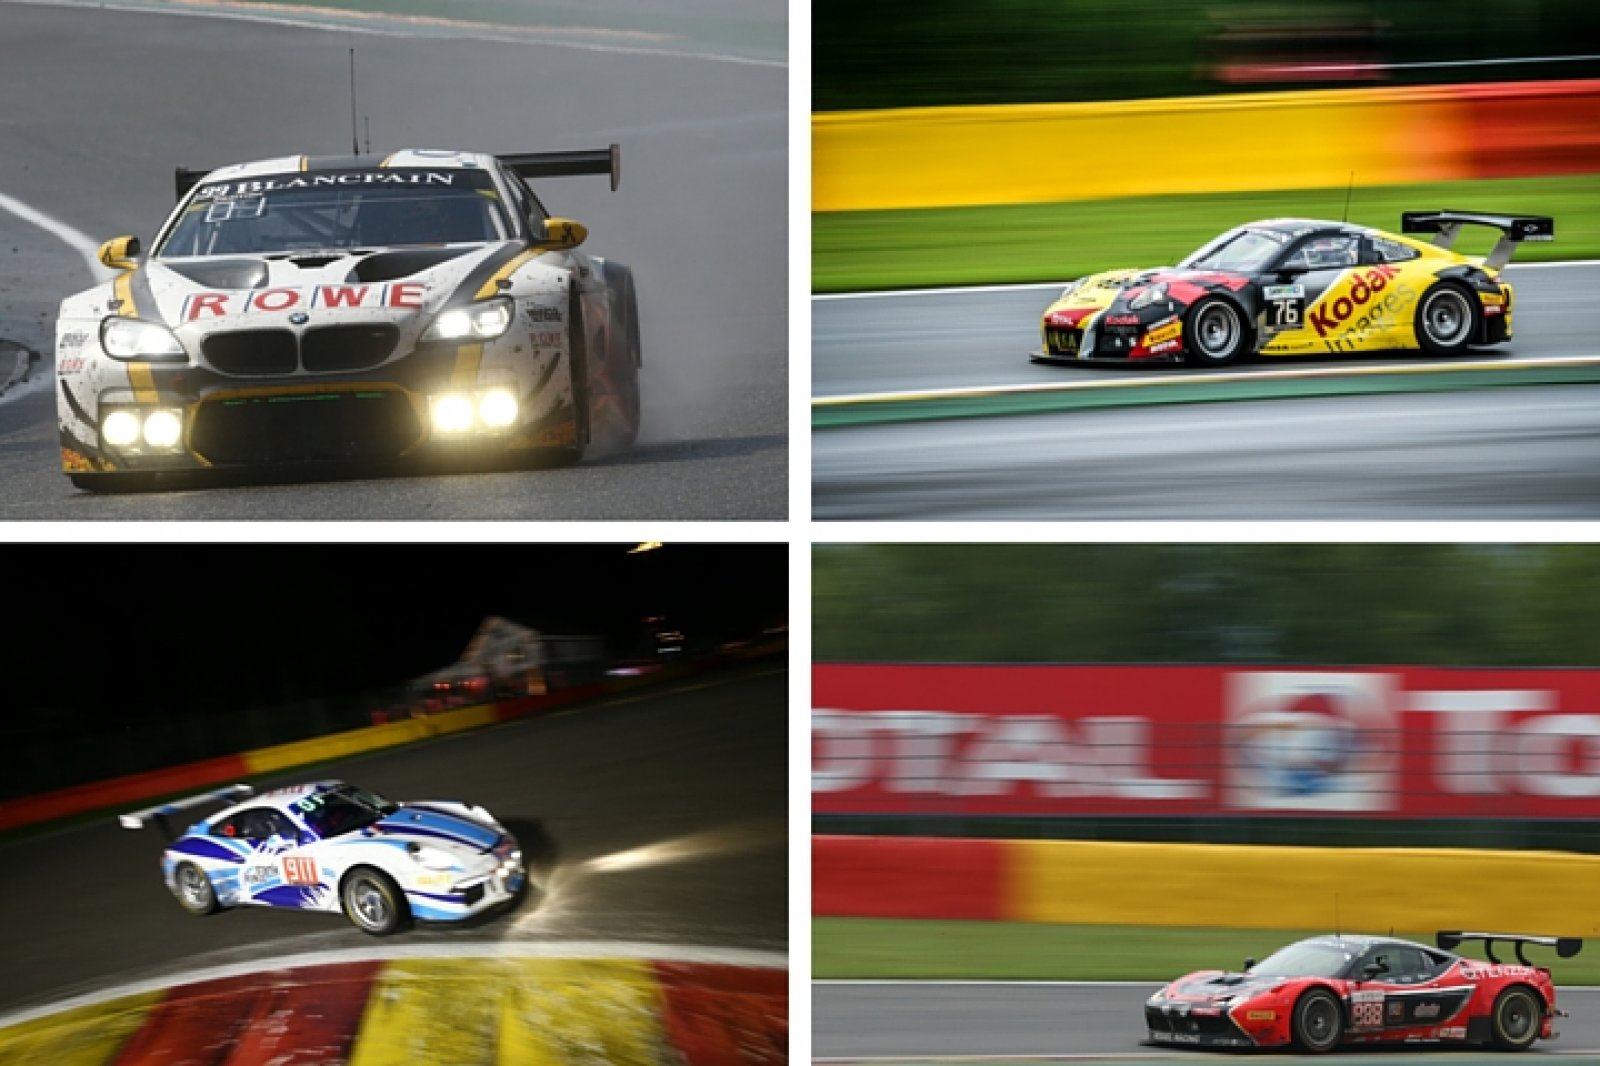 BMW wins eventful Total 24 Hours of Spa after epic finish